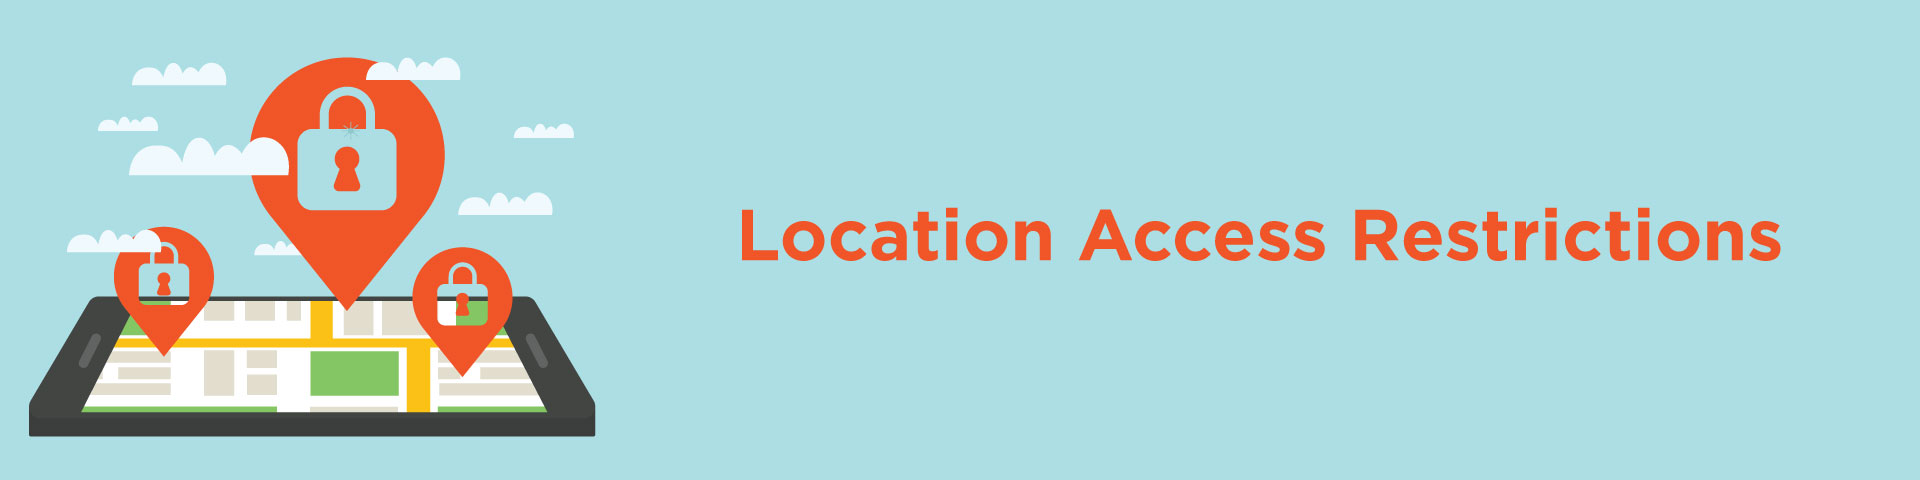 Location Access Restrictions